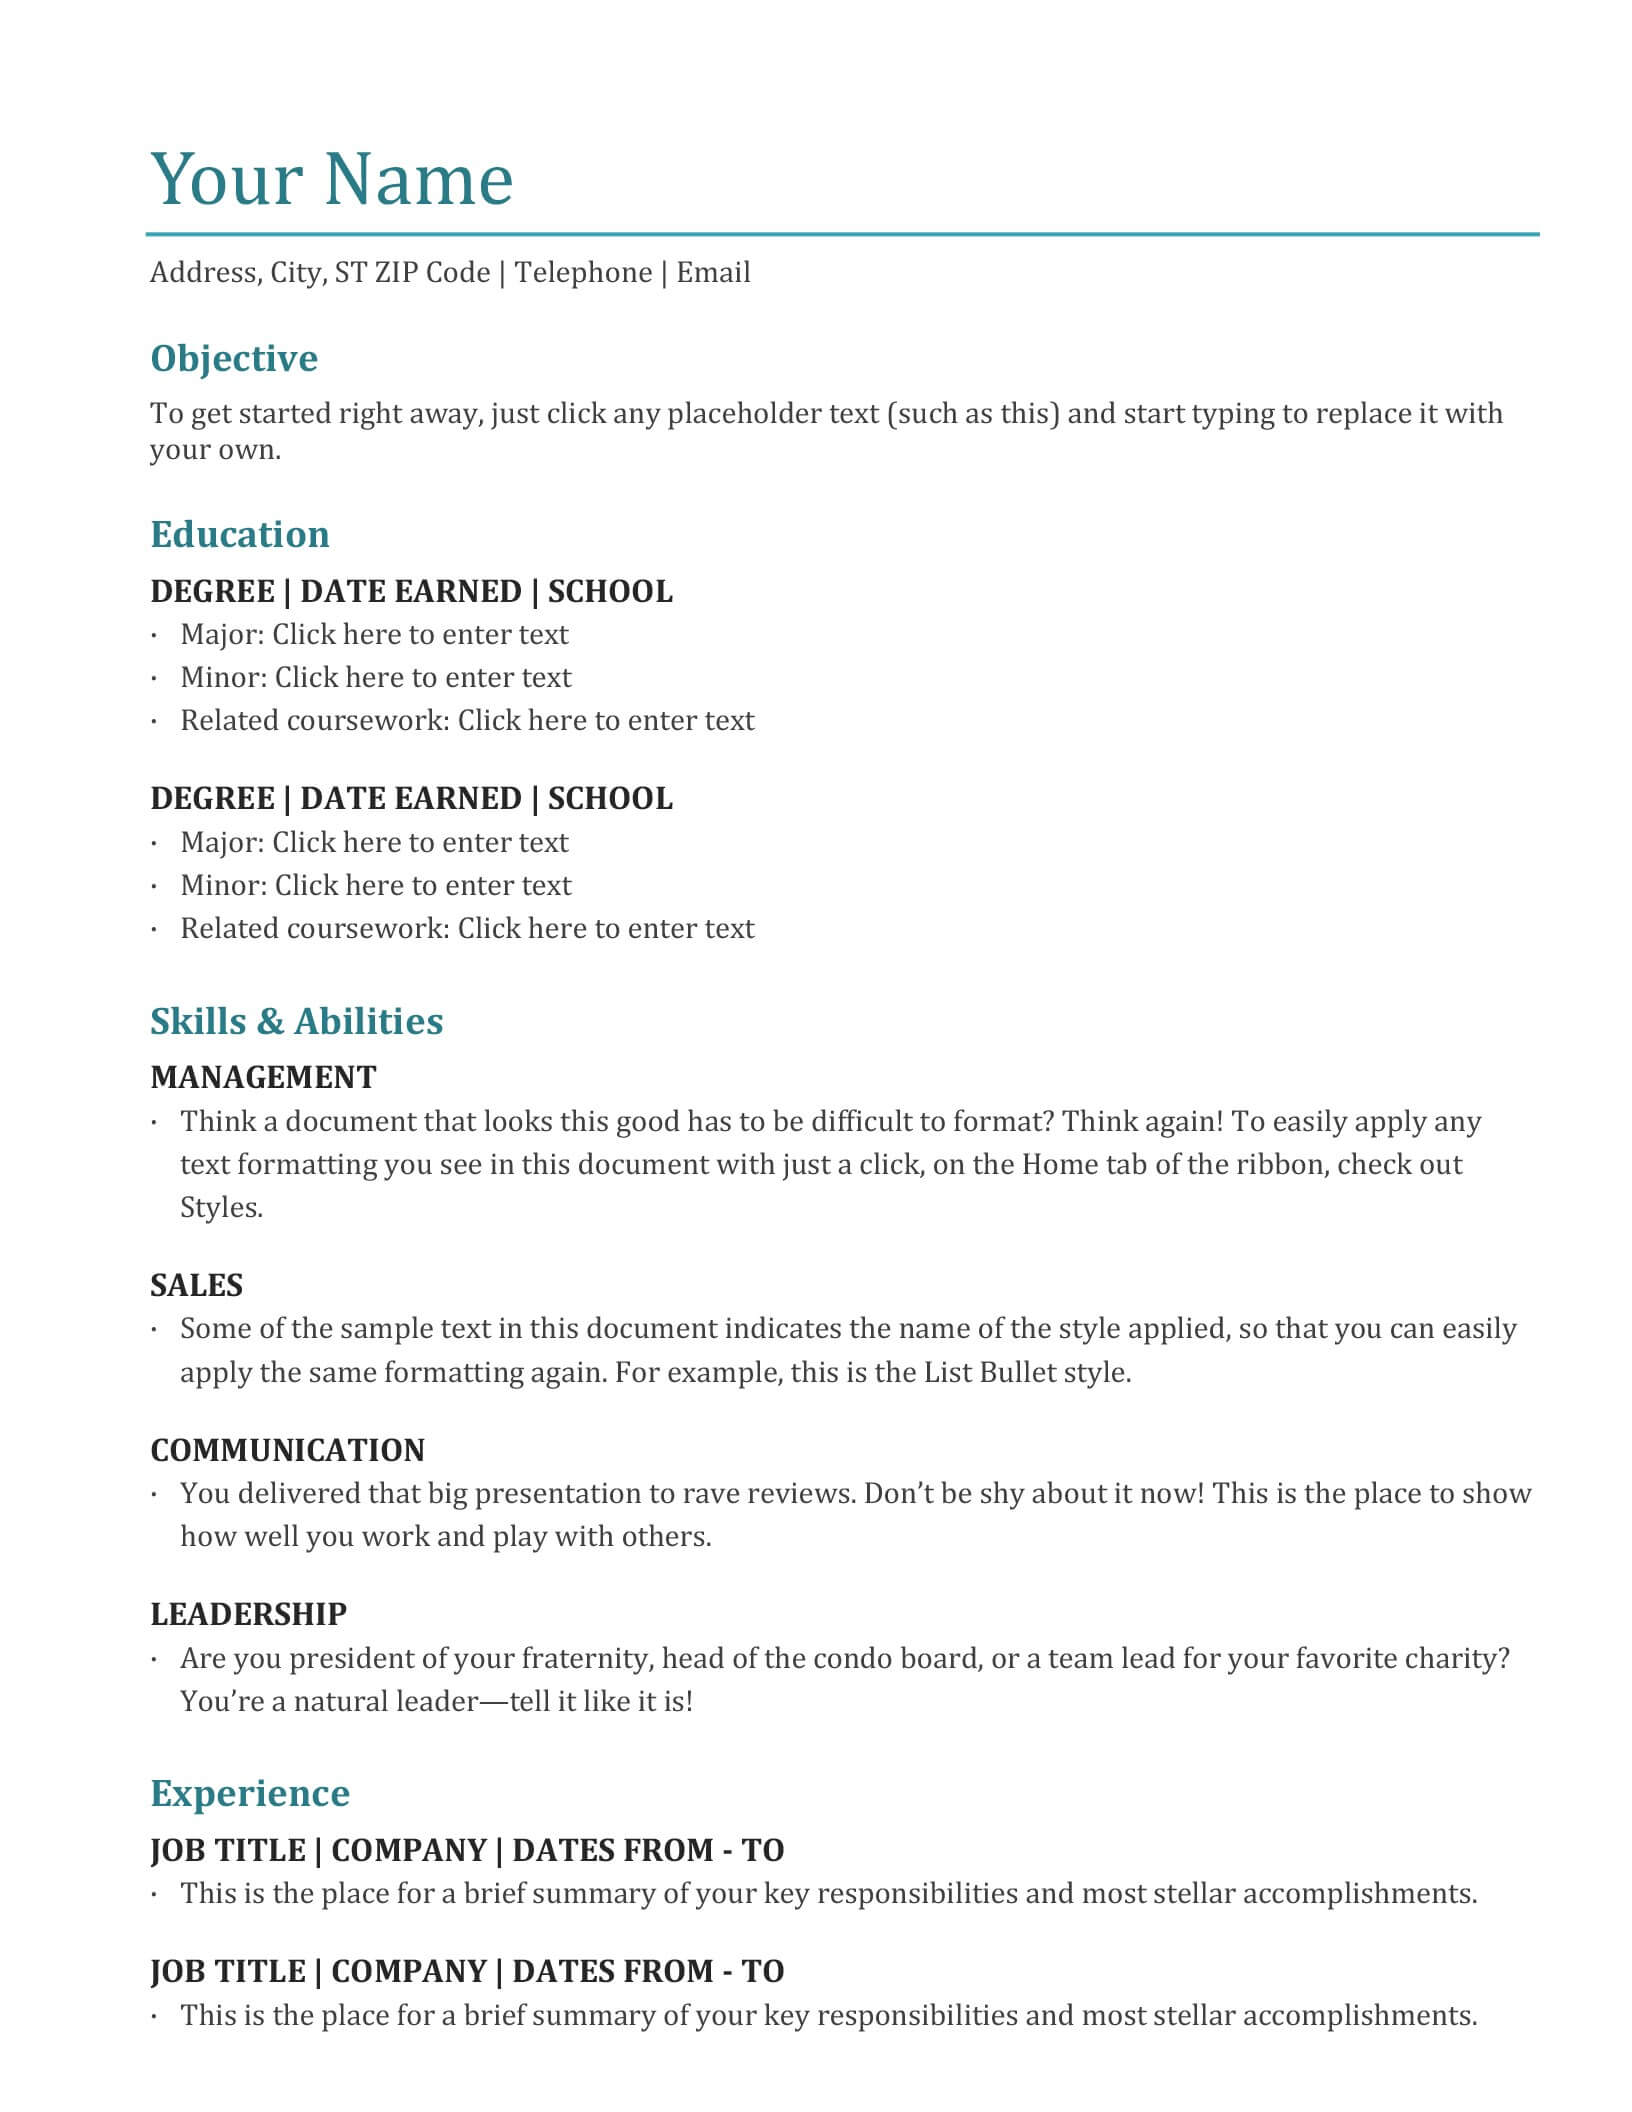 020 Image Resume Template Microsoft Word Ideas Unique On Cv With How To Get A Resume Template On Word